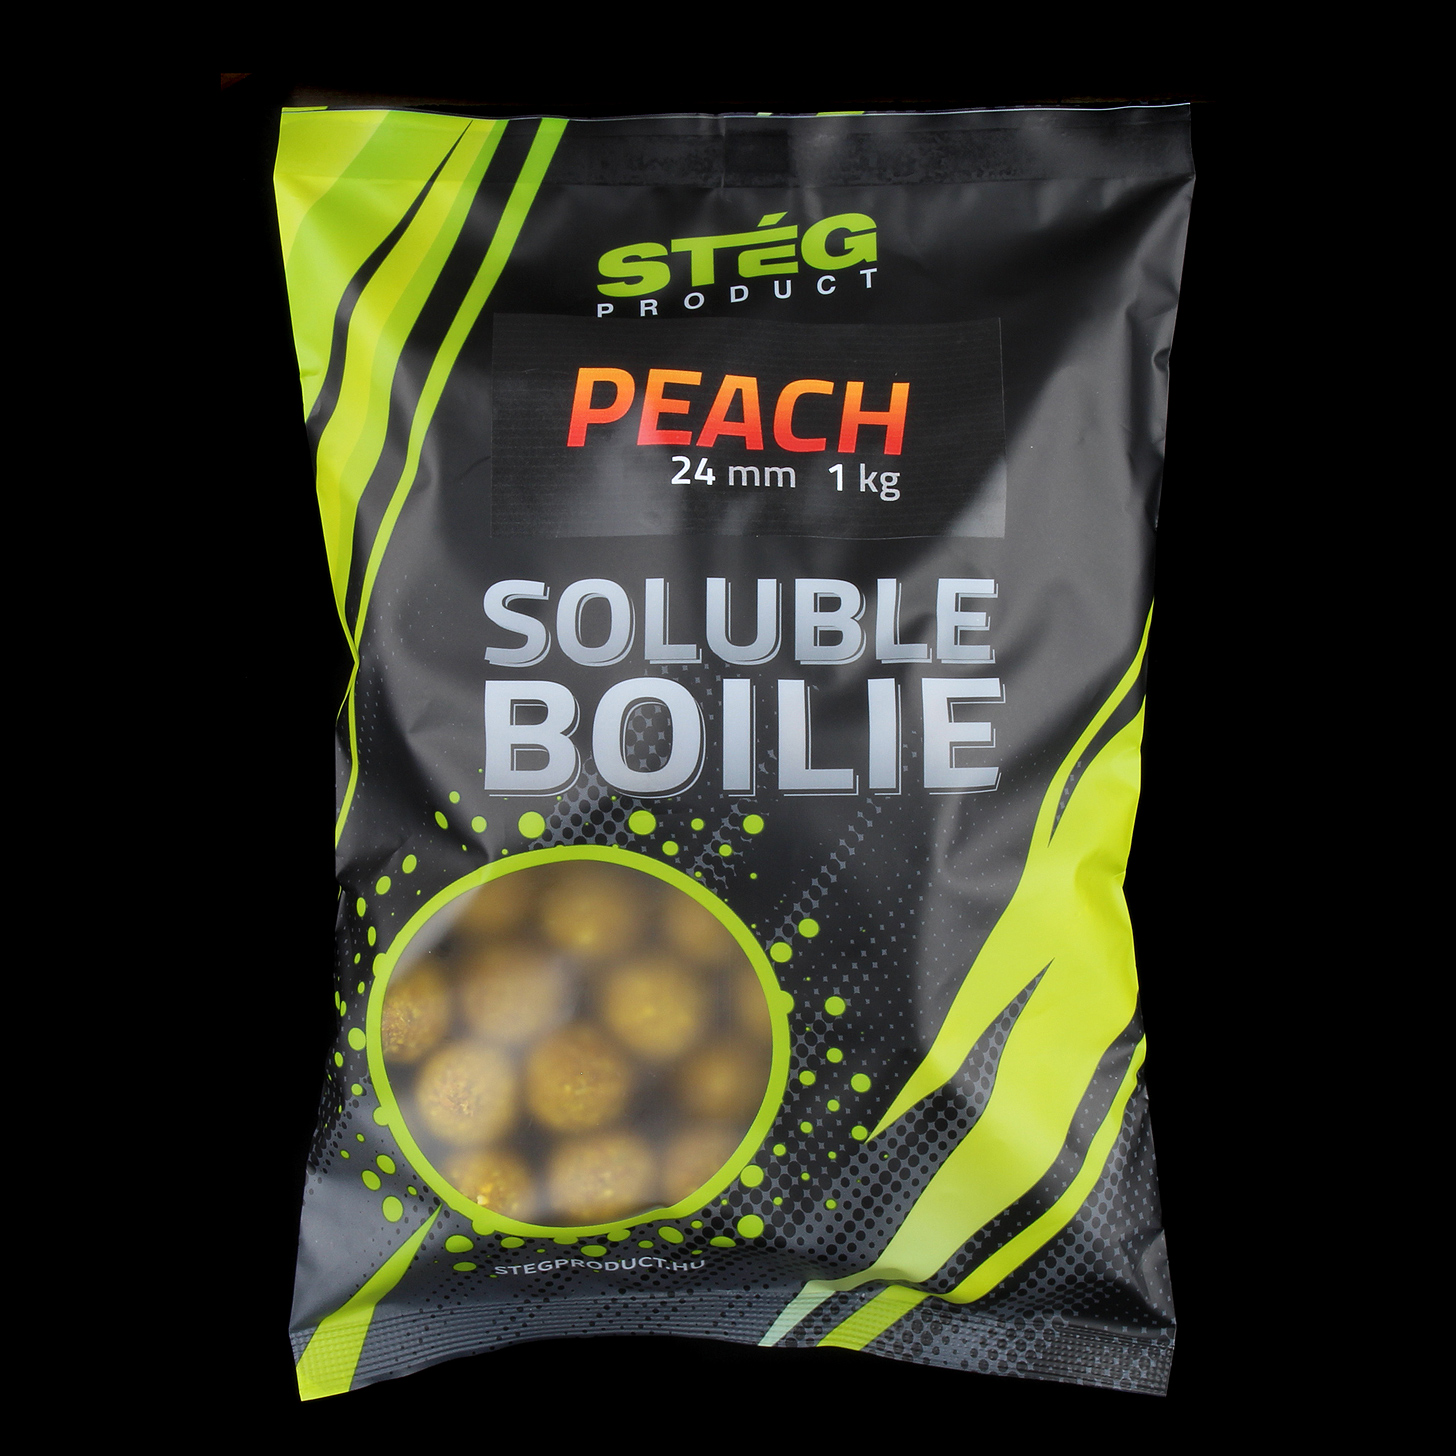 STÉG PRODUCT SOLUBLE BOILIE 24 MM CHILI-PEACH 1 KG